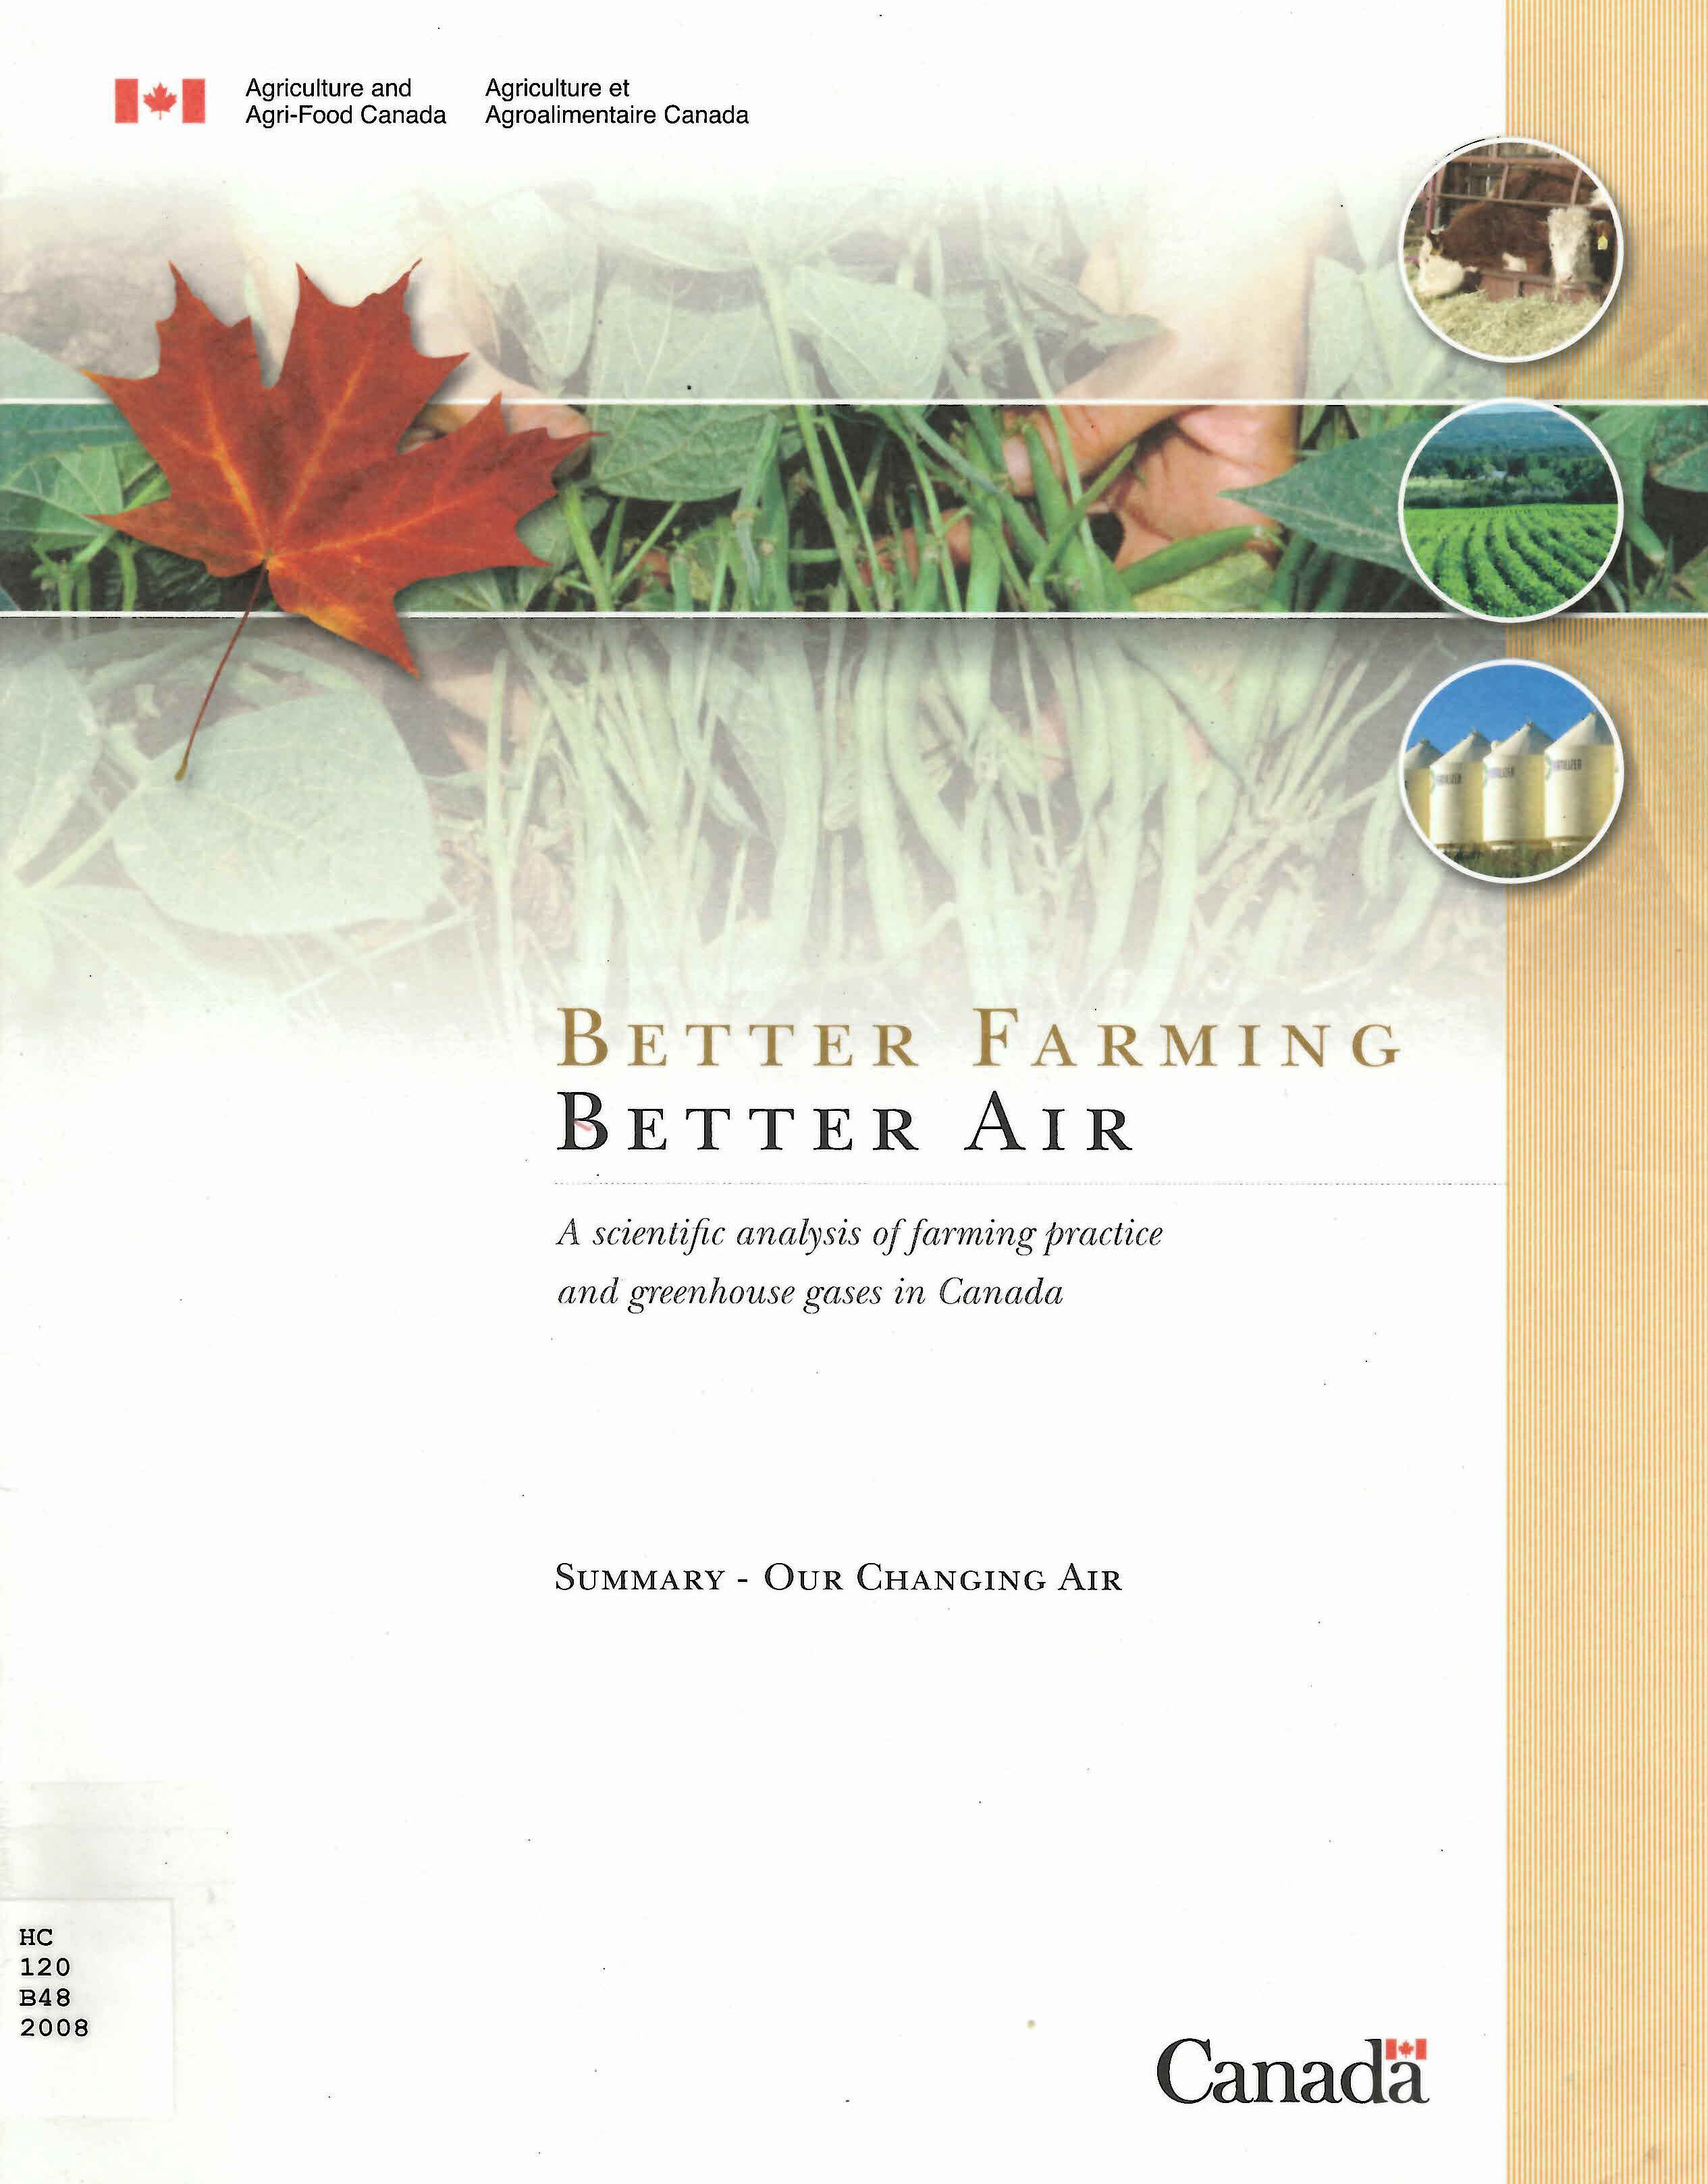 Better farming, better air : a scientific analysis of farming practice and greenhouse gases in Canada, summary -- our changing air